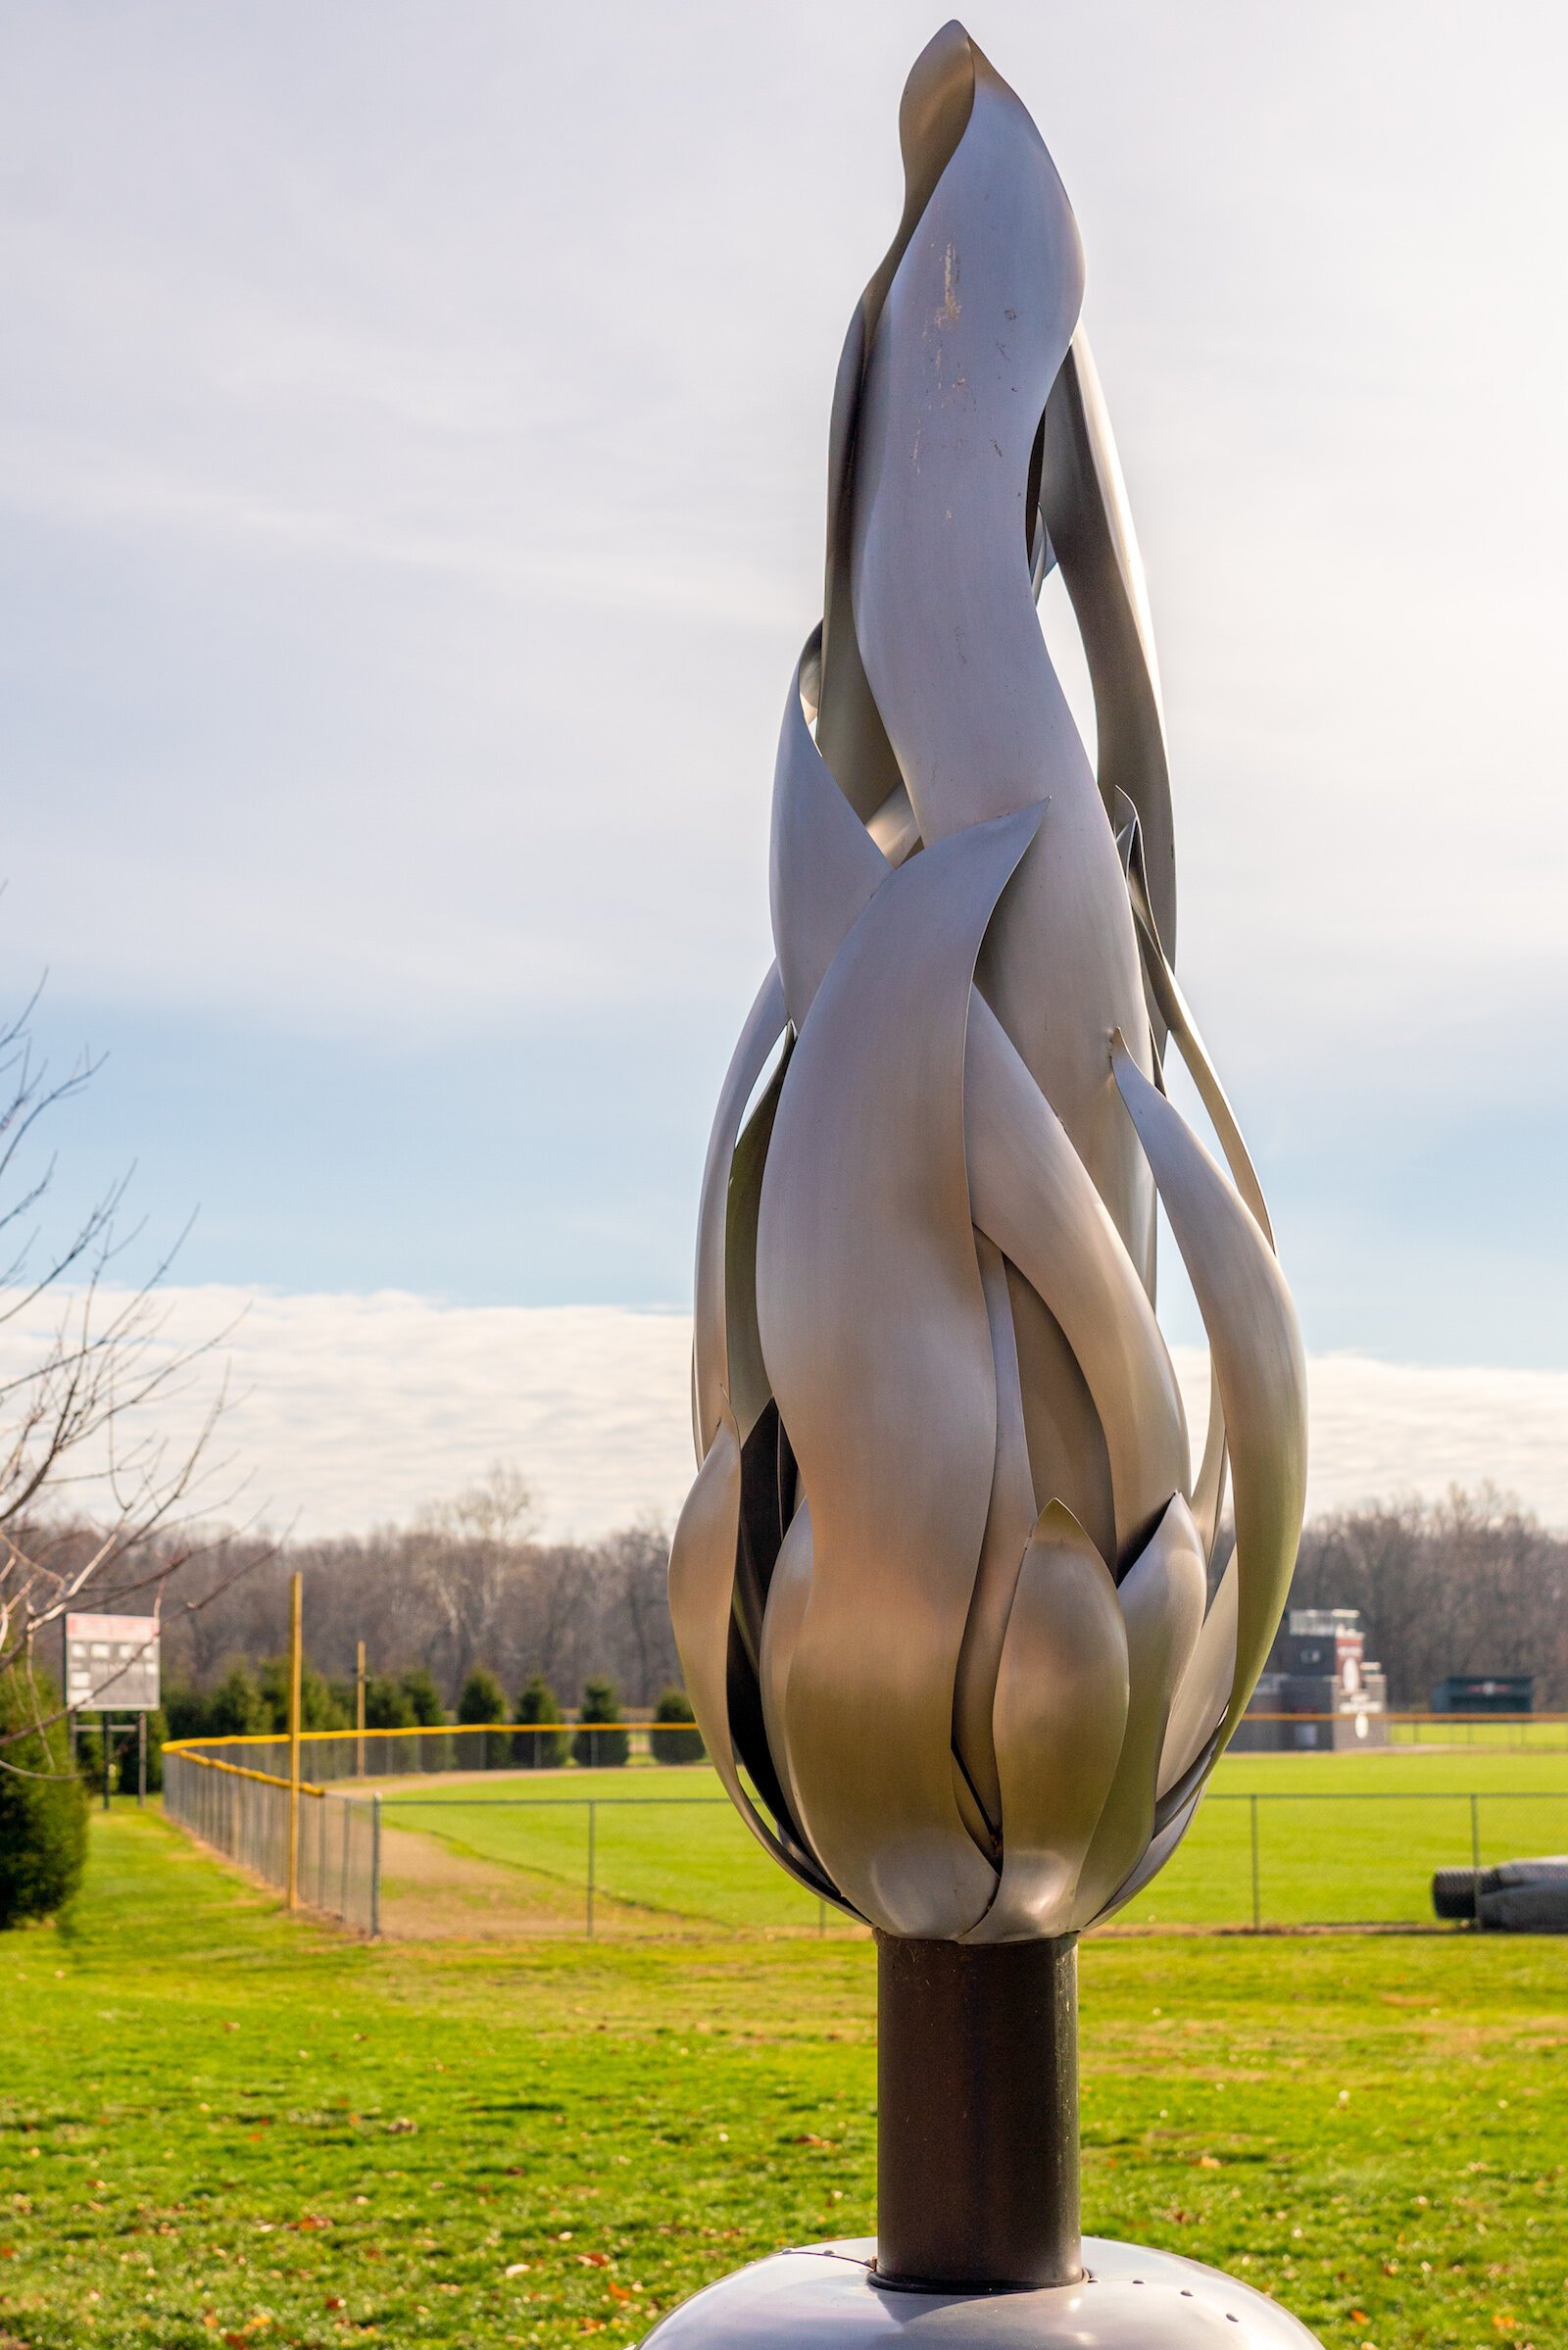 Kosciusko County is home to many unique works of art, like sculptures.